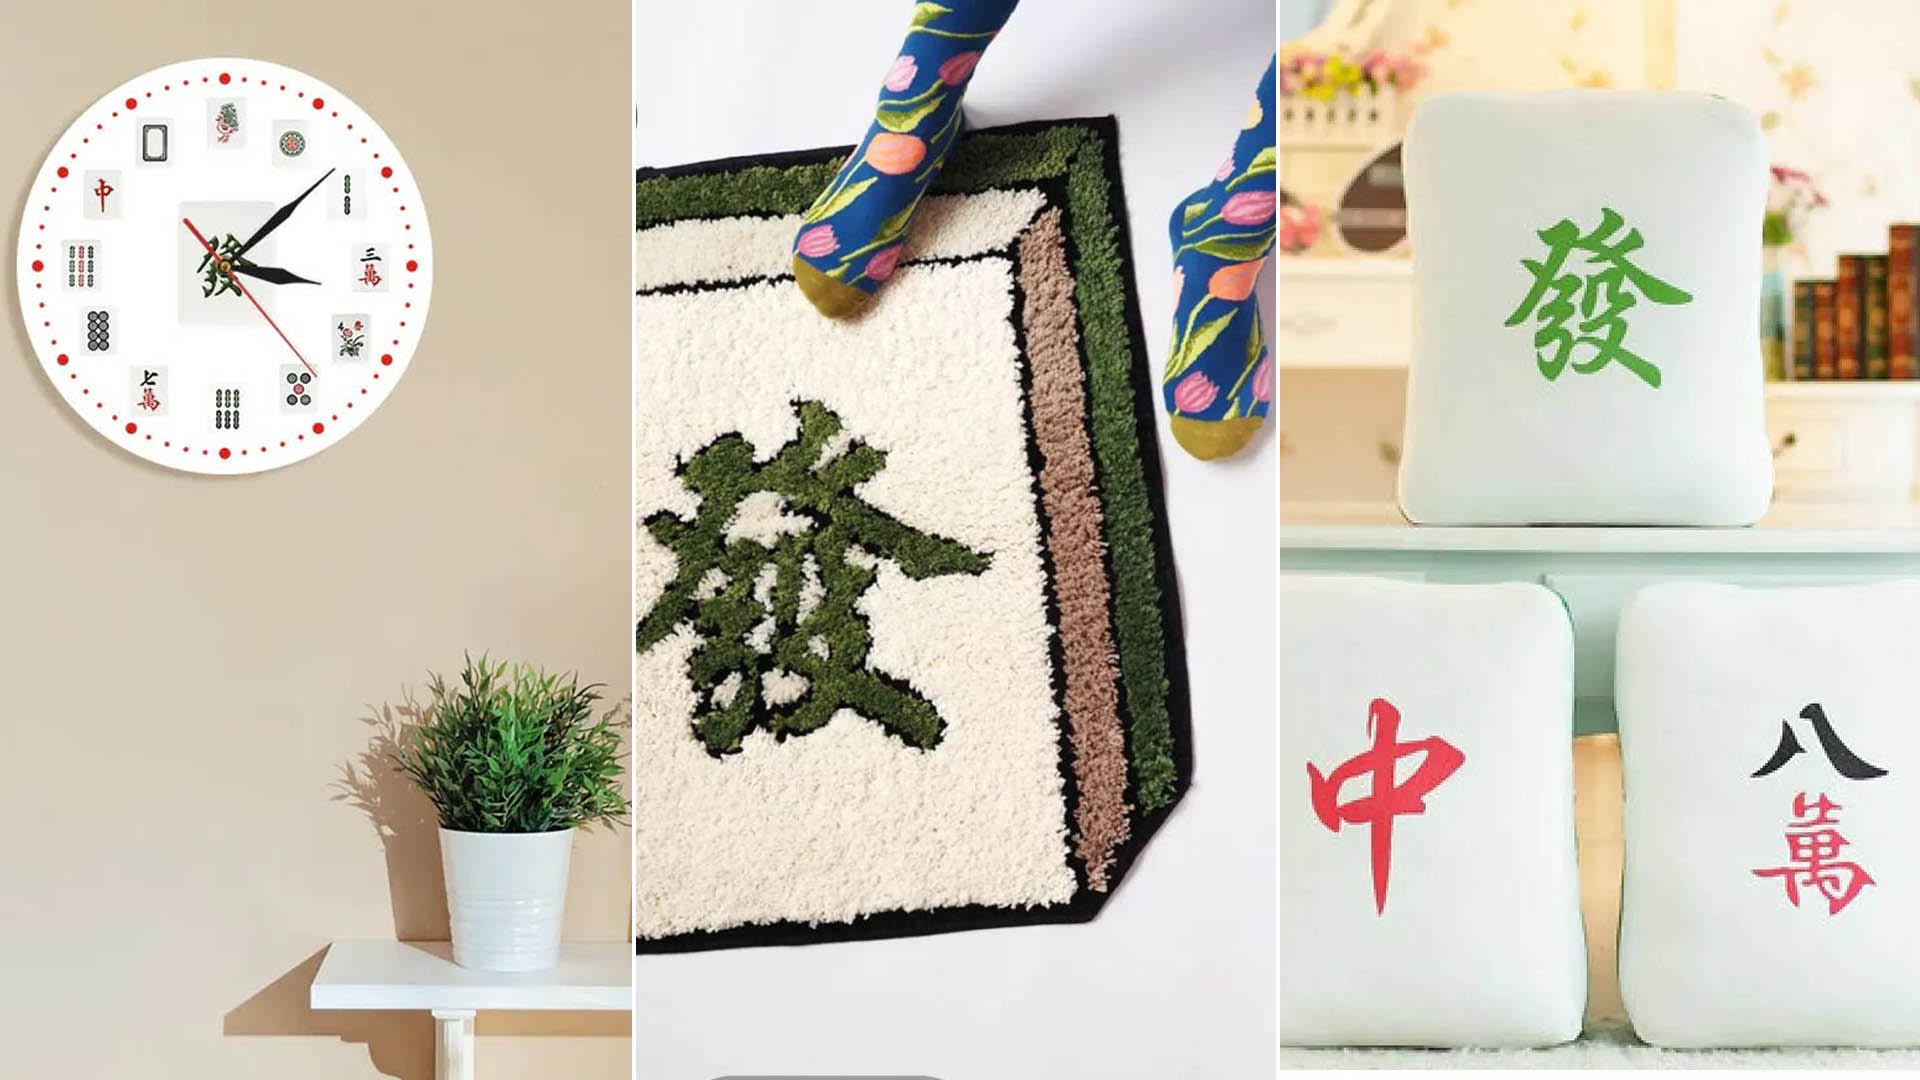 Mahjong-Themed Home Decor Items To Buy — So You Can Give Your Home A Huat Makeover Without Any Renovations